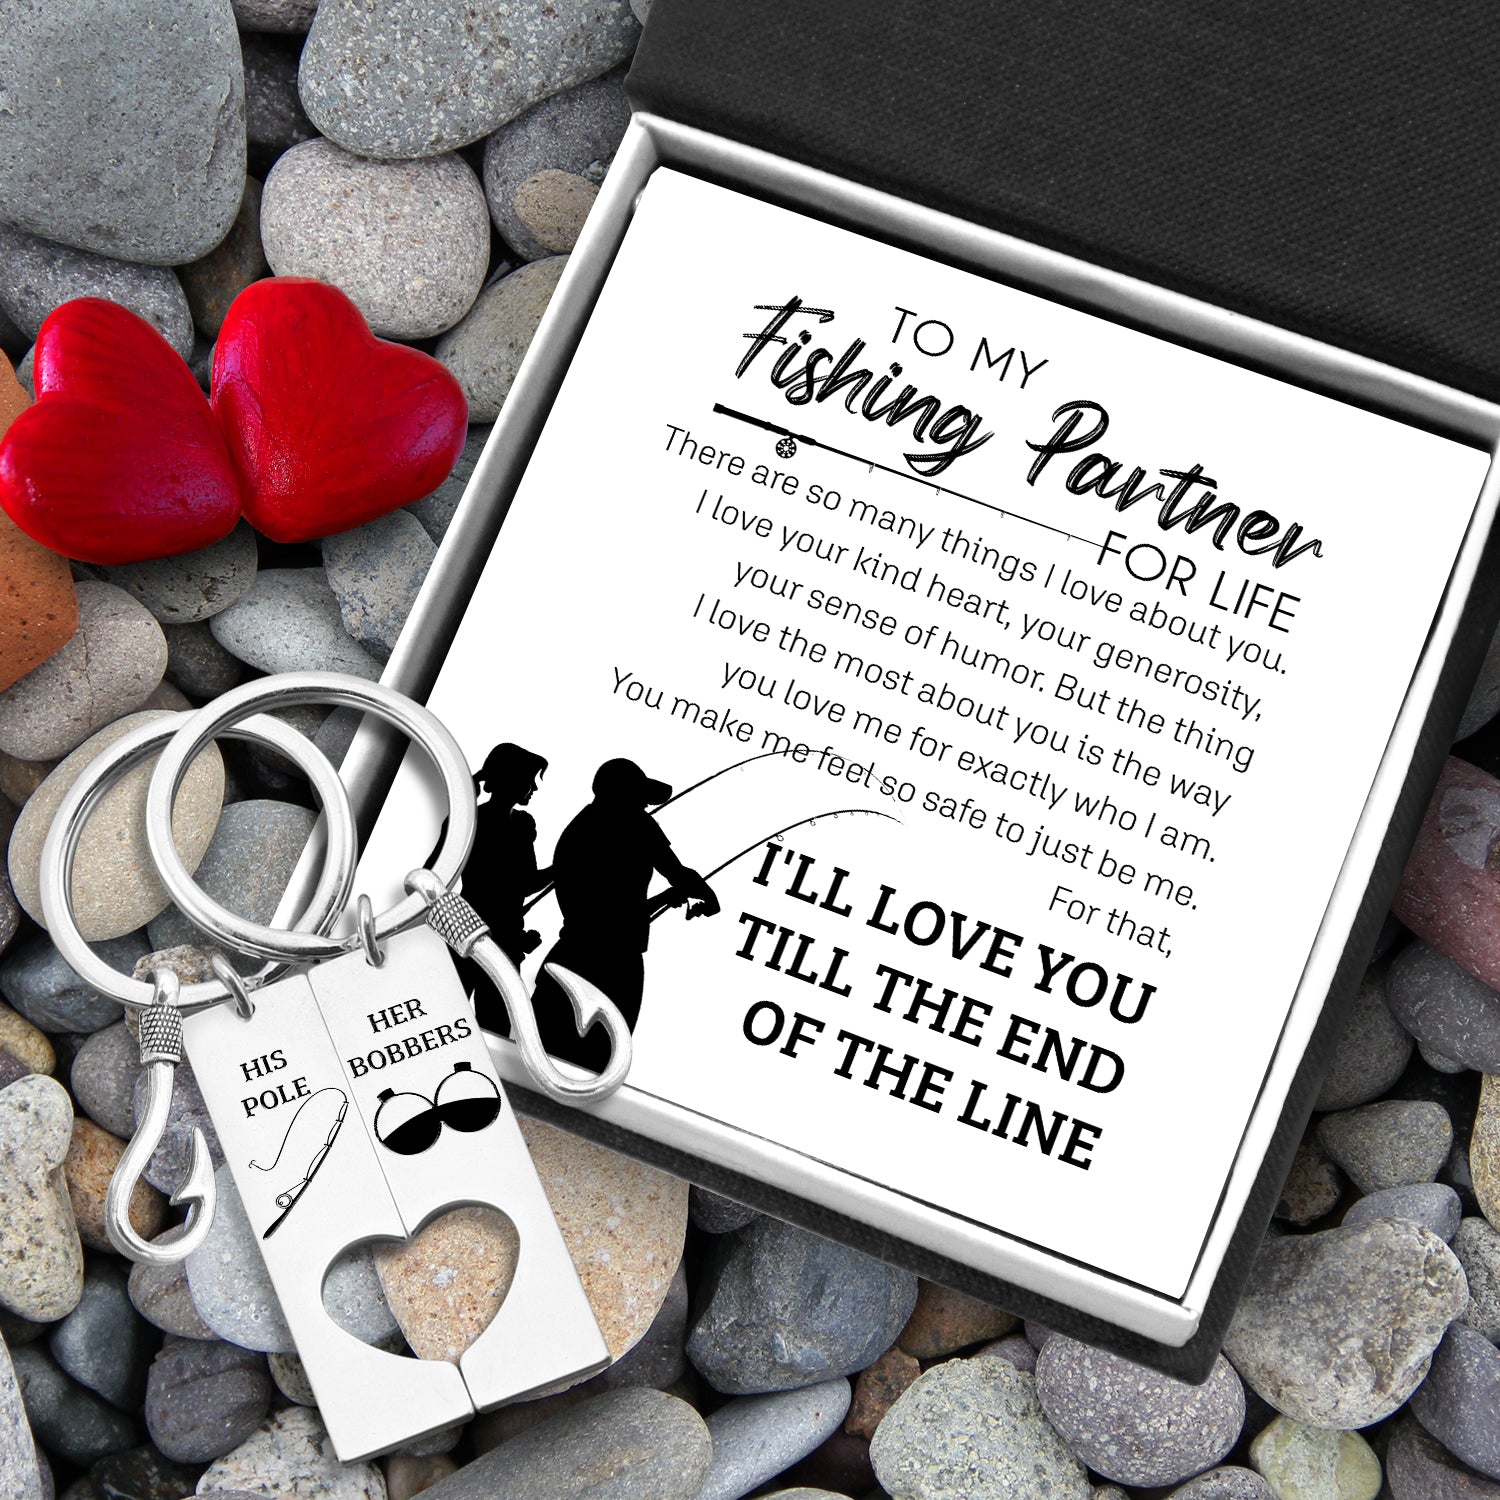 Fishing Heart Couple Keychains - Fishing - To My Fishing Partner For Life - Till The End Of The Line - Ukgkcx26003